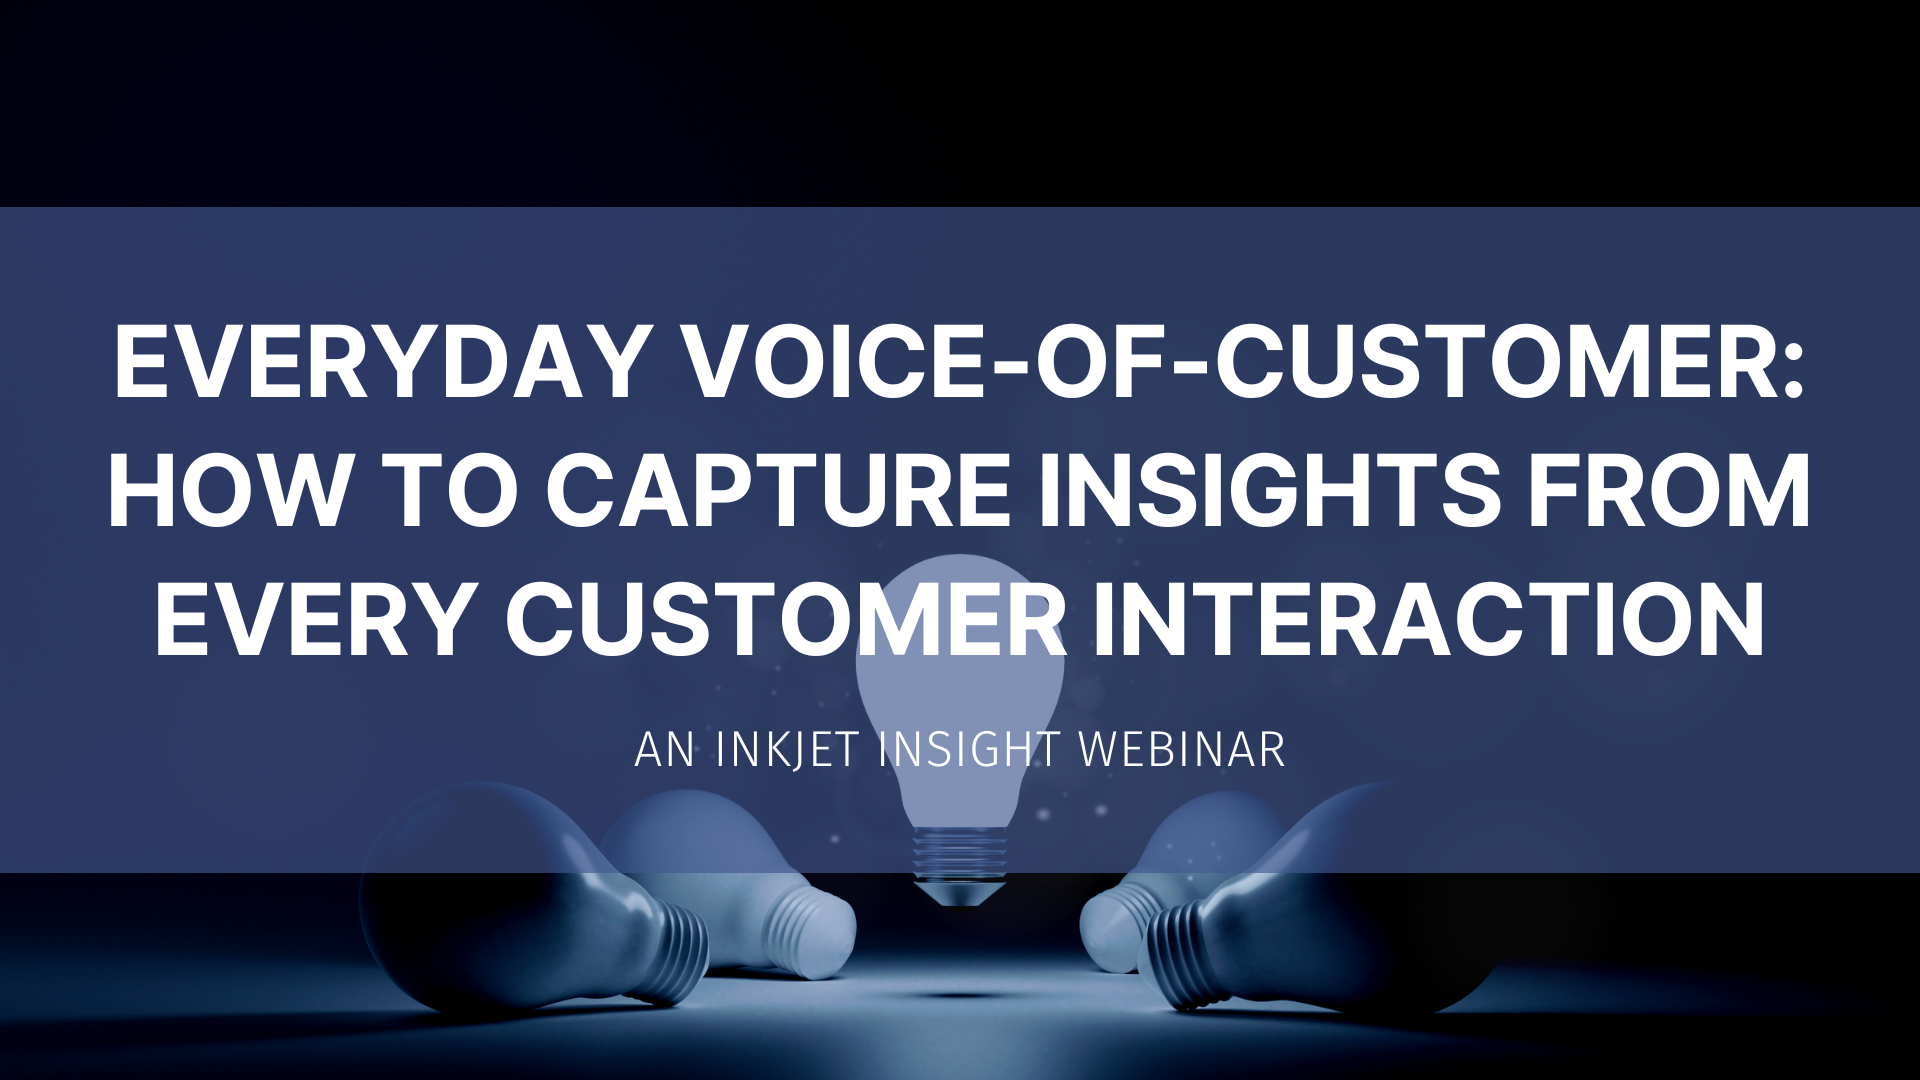 Featured image for “Everyday Voice-of-Customer: How to Capture Insights from Every Customer Interaction”